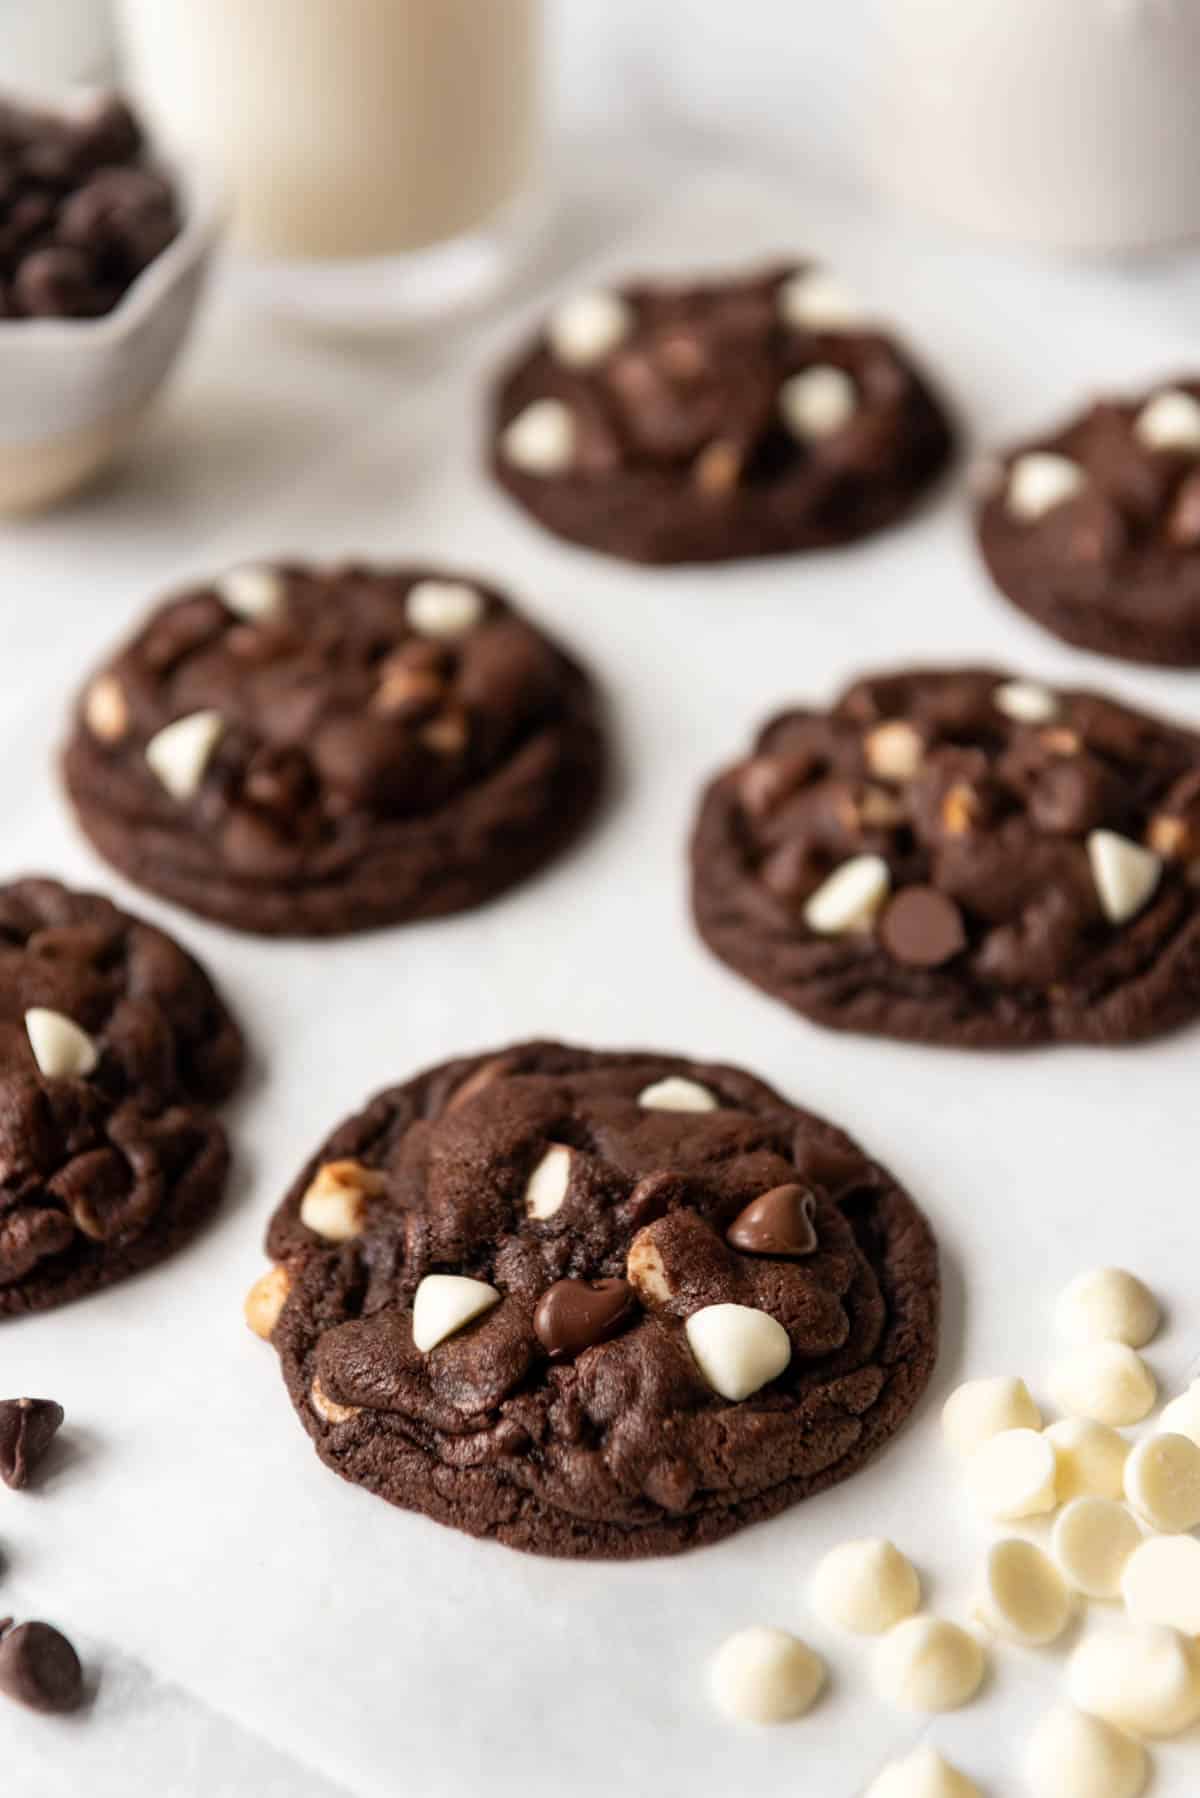 Six dark chocolate cookies on parchment paper next to white chocolate chips.